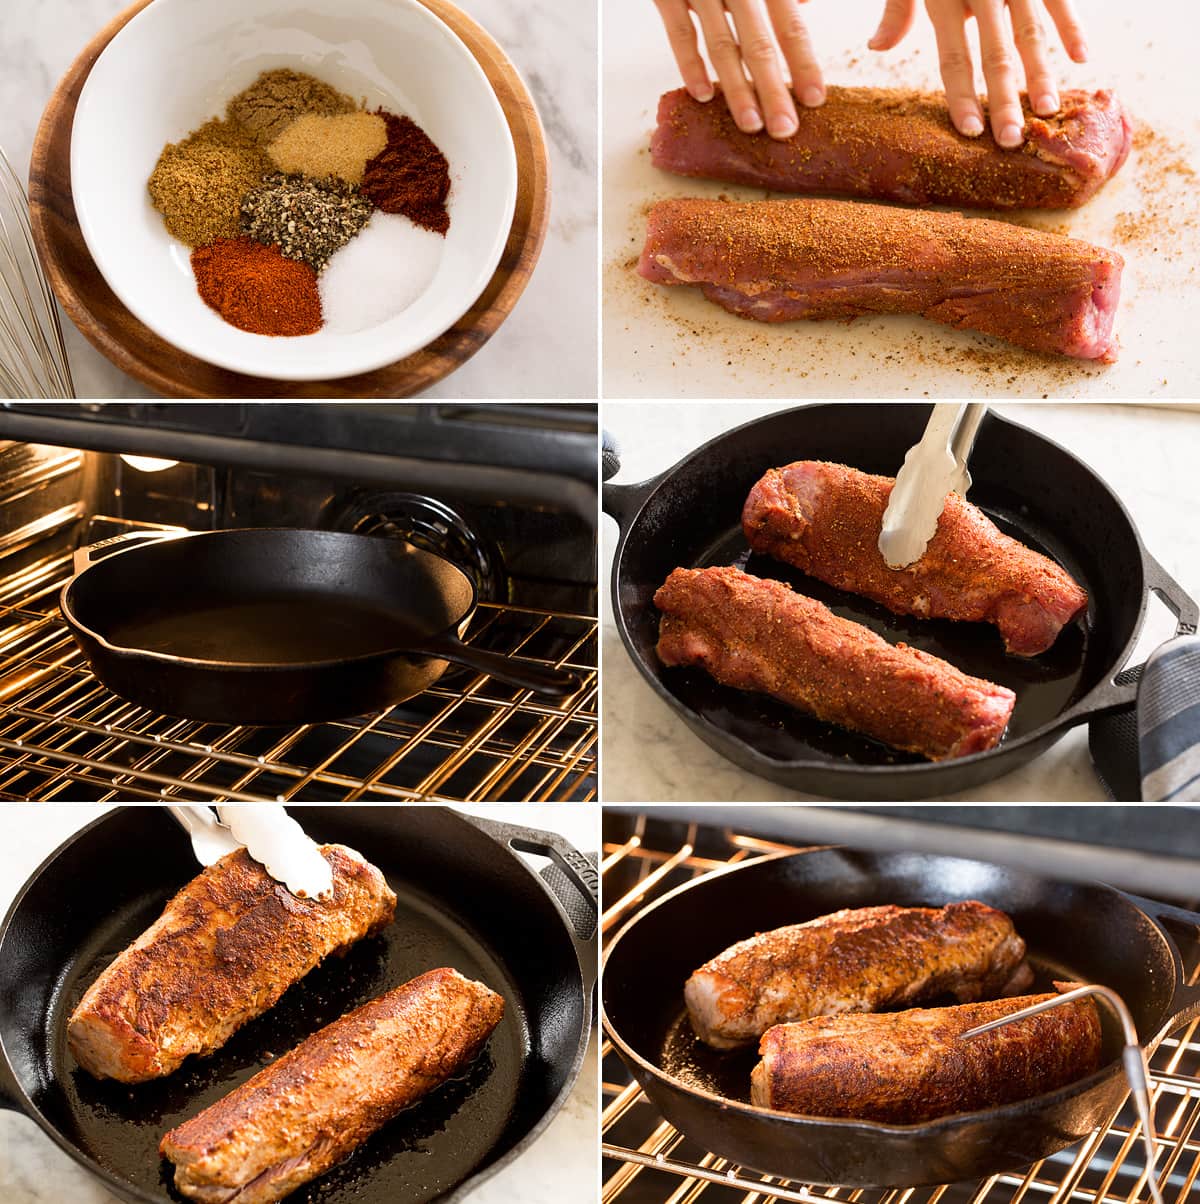 Collage of six images showing how to prepare pork tenderloin with seasoning mixture and roasting in a cast iron pan in the oven.